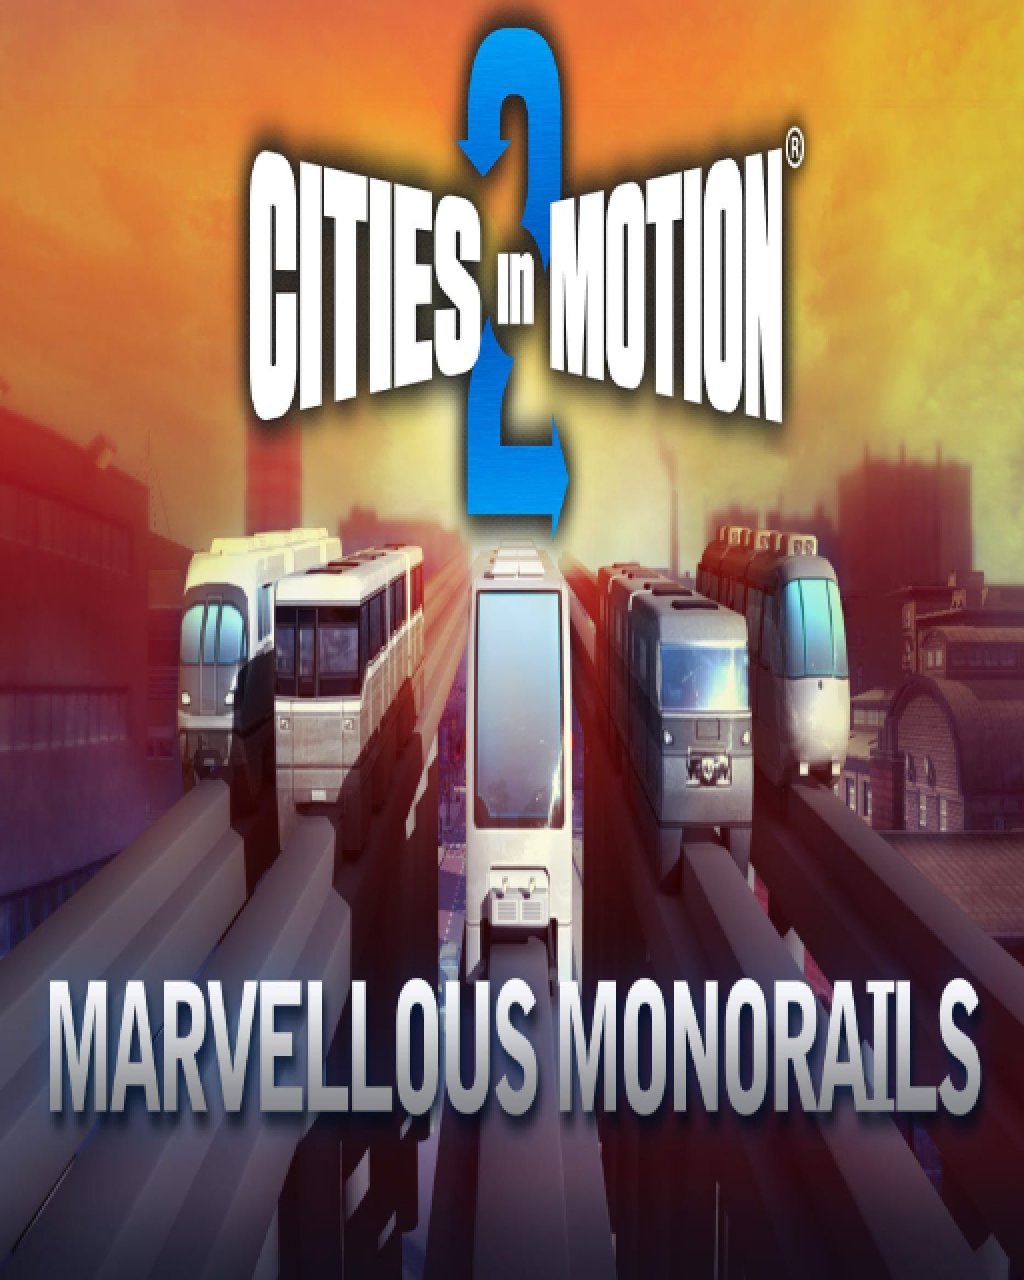 Cities in Motion 2 Marvellous Monorails